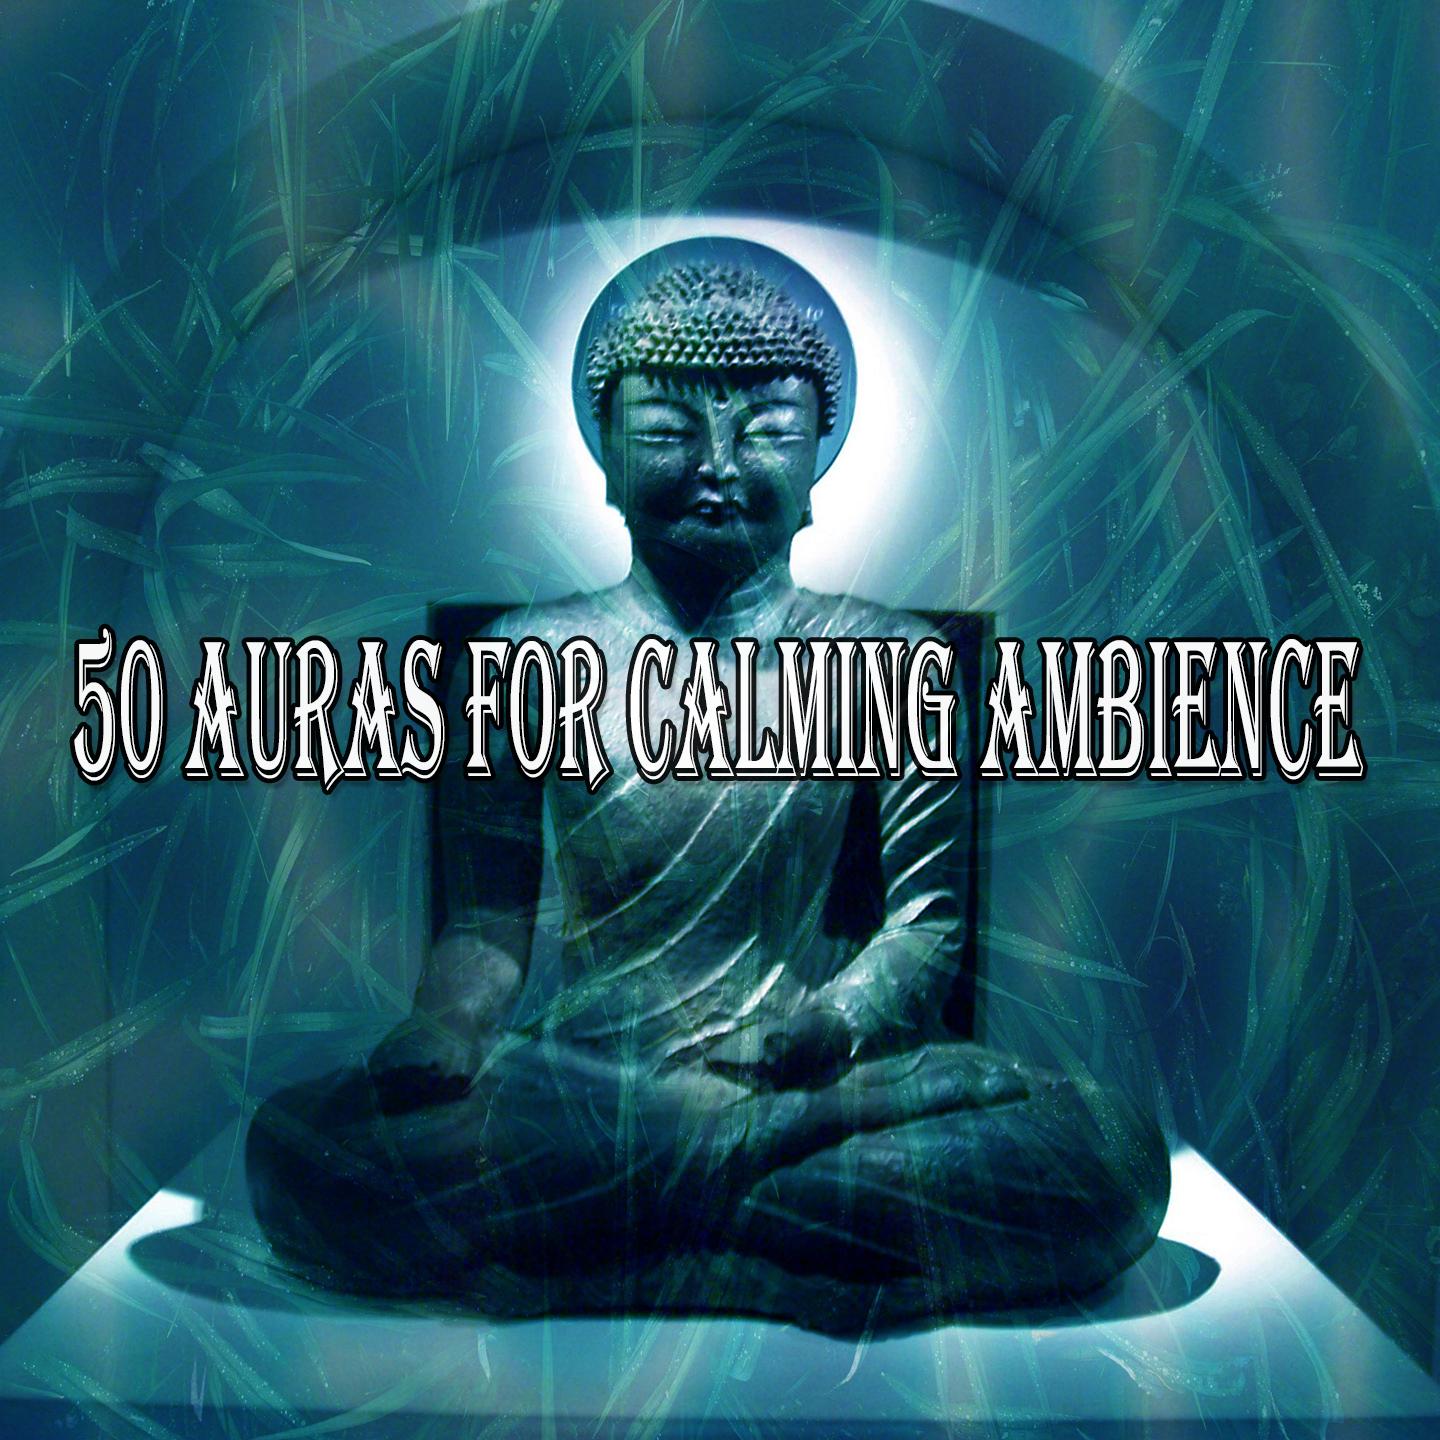 50 Auras for Calming Ambience